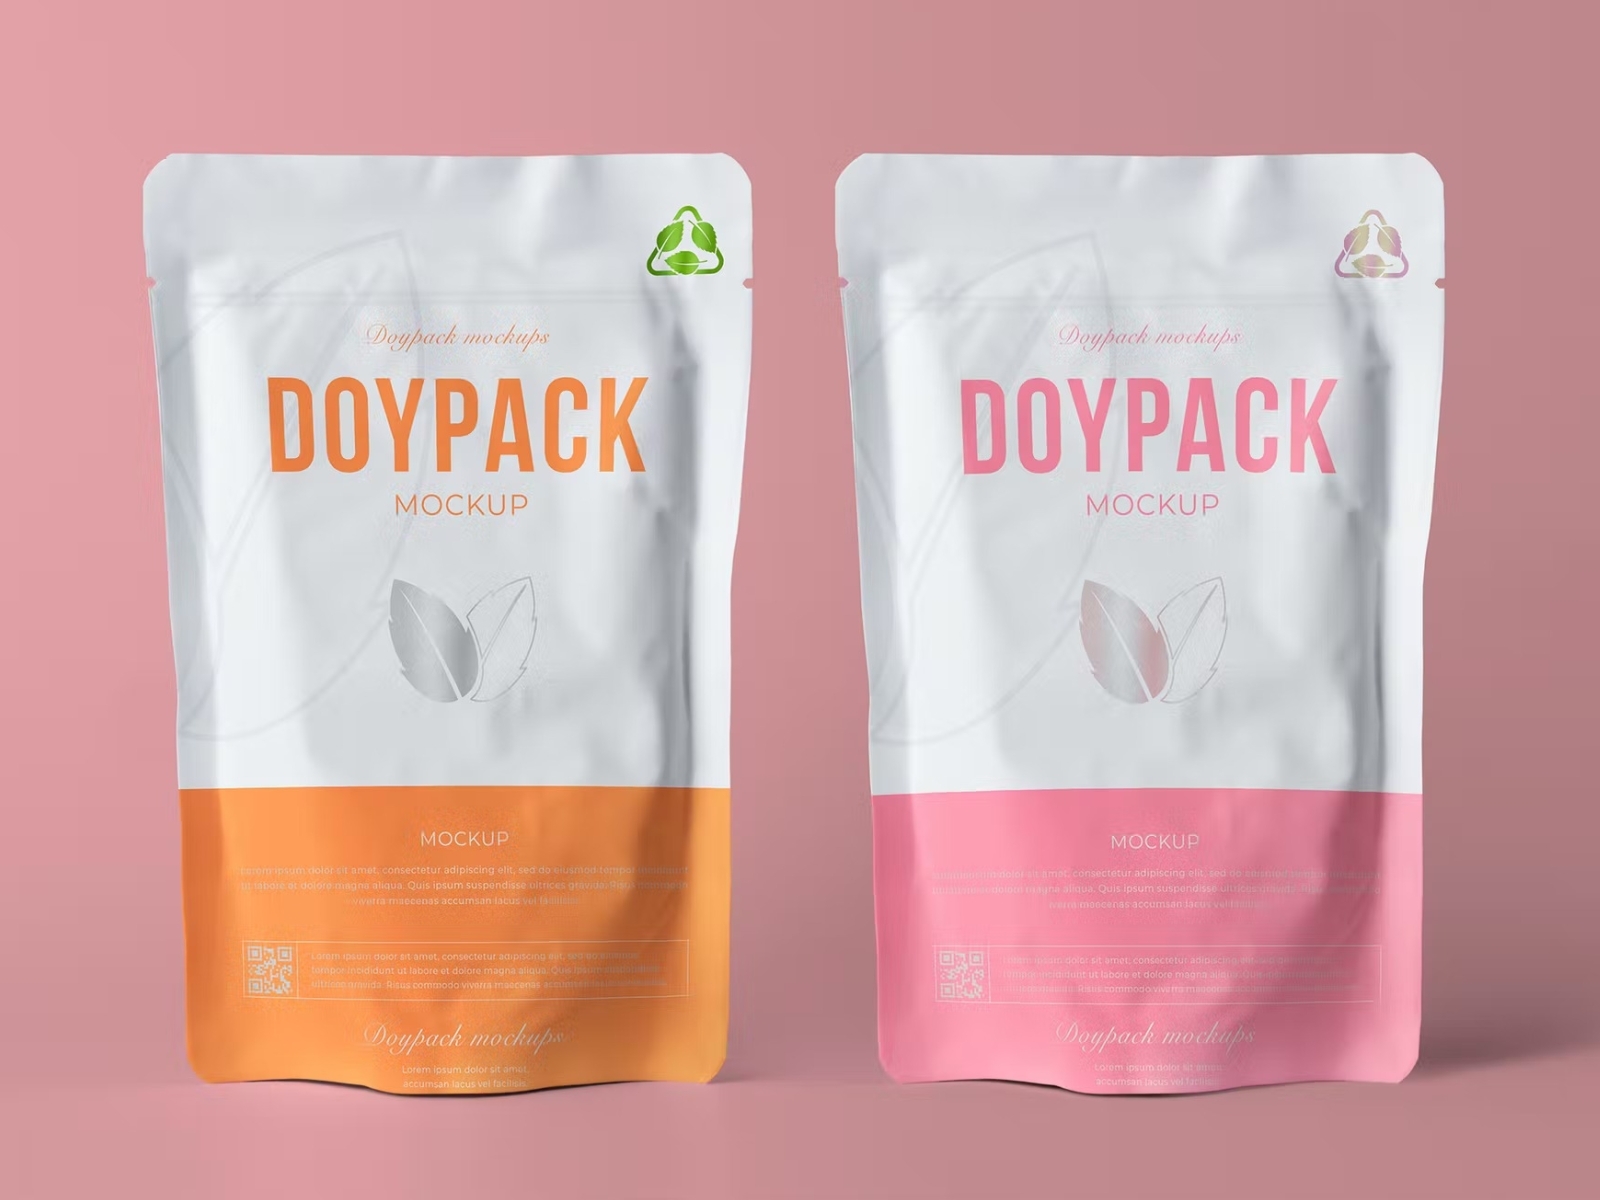 Doypack Packaging Mockup by Mockup Templates on Dribbble